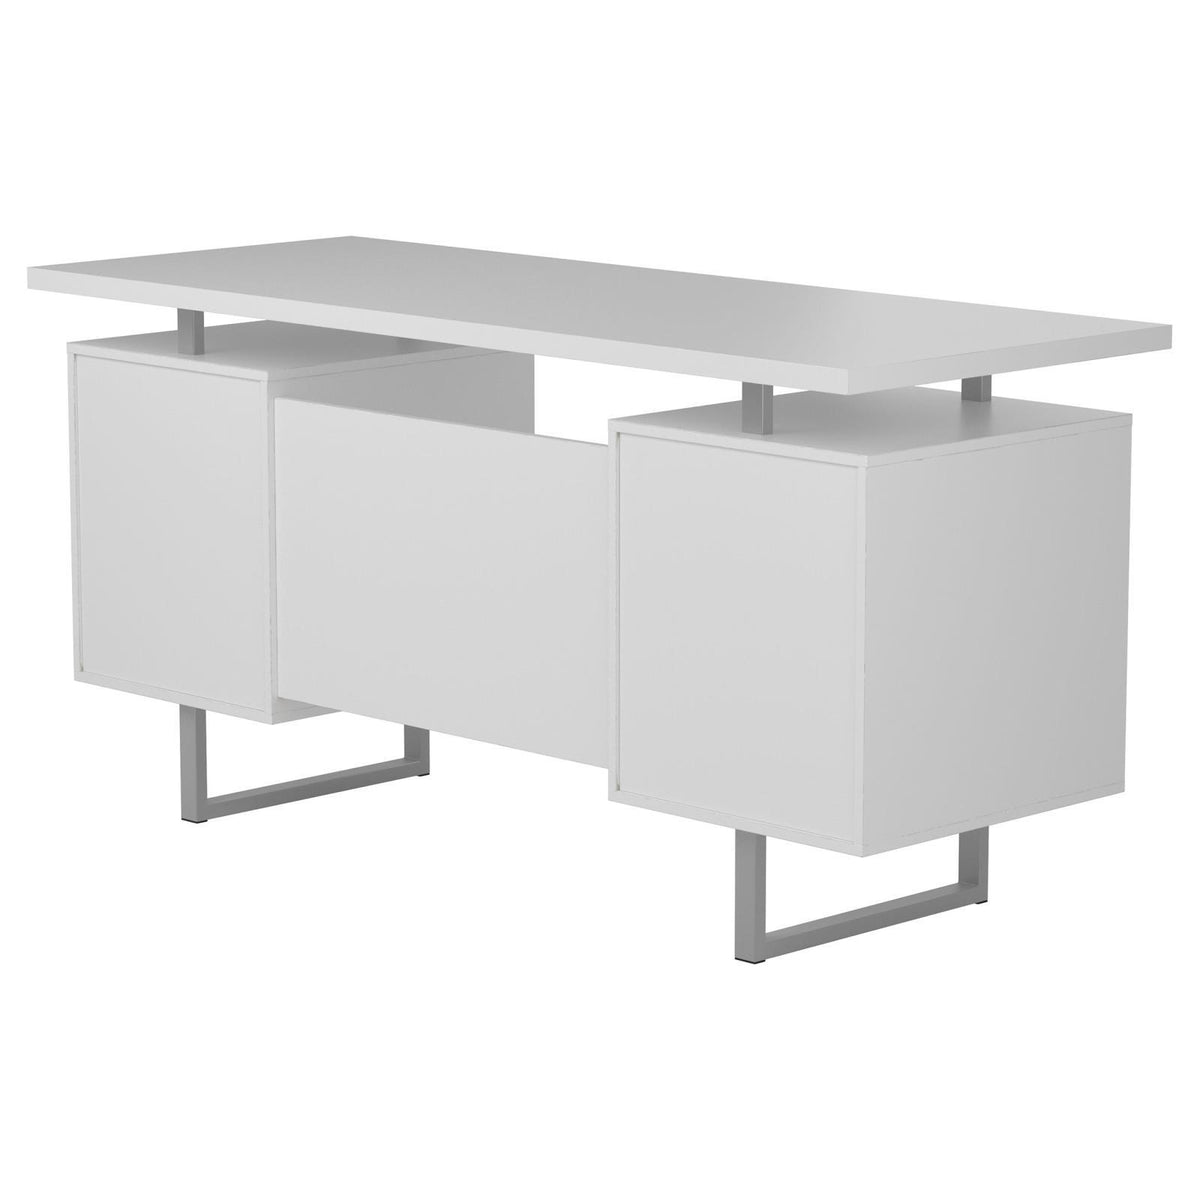 Lawtey Floating Top Office Desk White Gloss Half Price Furniture